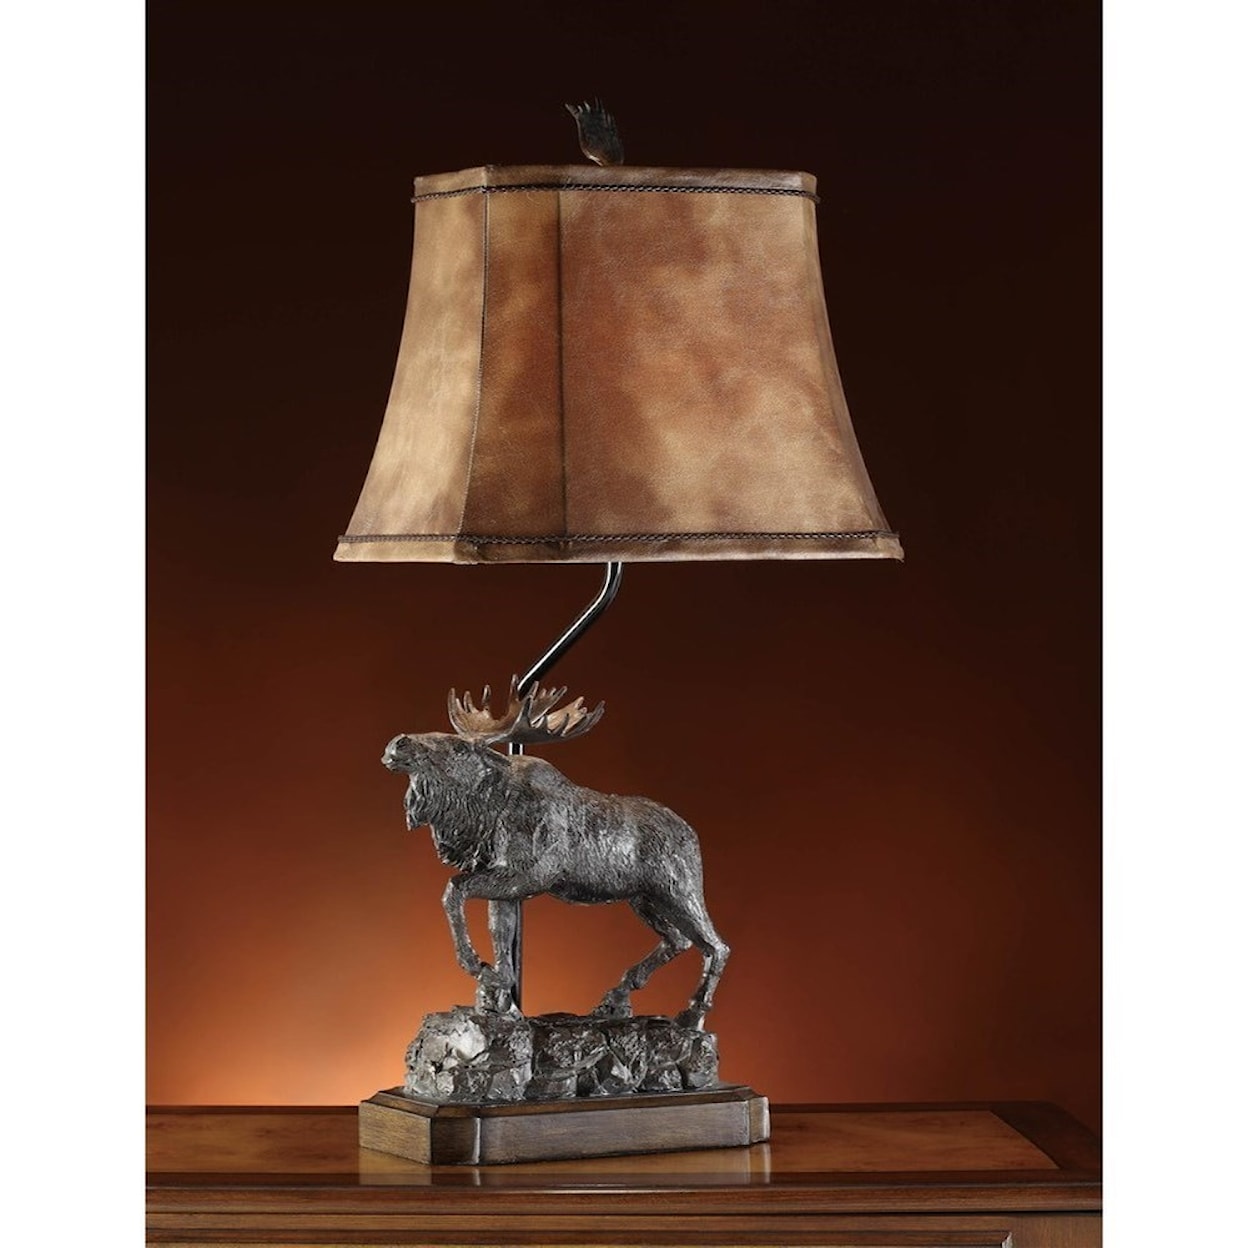 Crestview Collection Lighting Majestic Table Lamp